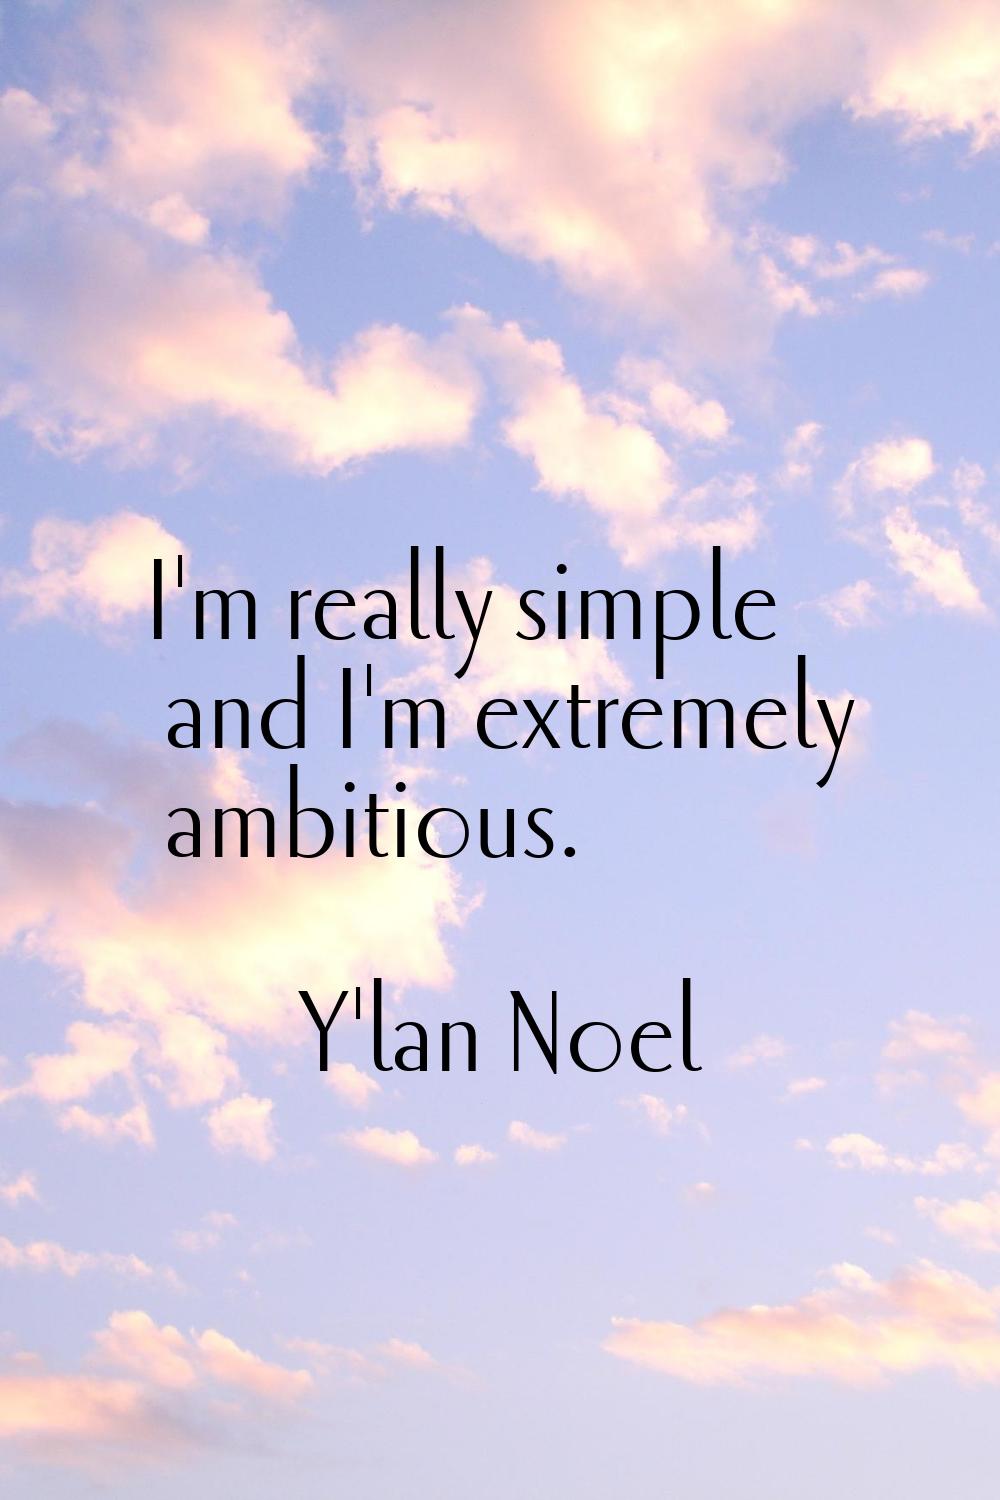 I'm really simple and I'm extremely ambitious.